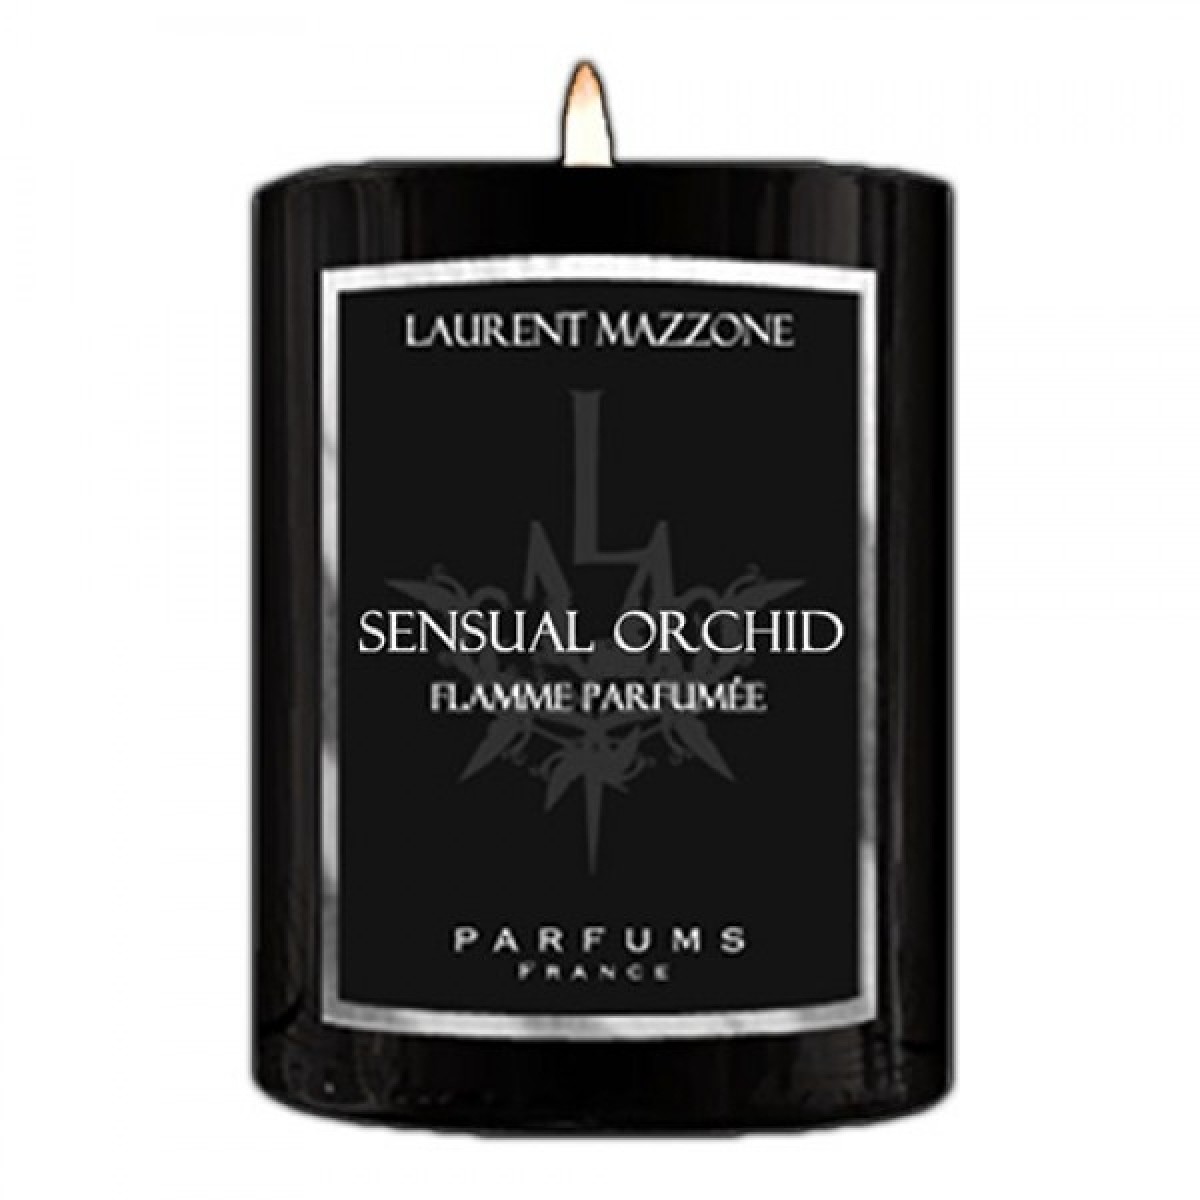 SENSUAL ORCHID - LM Parfums